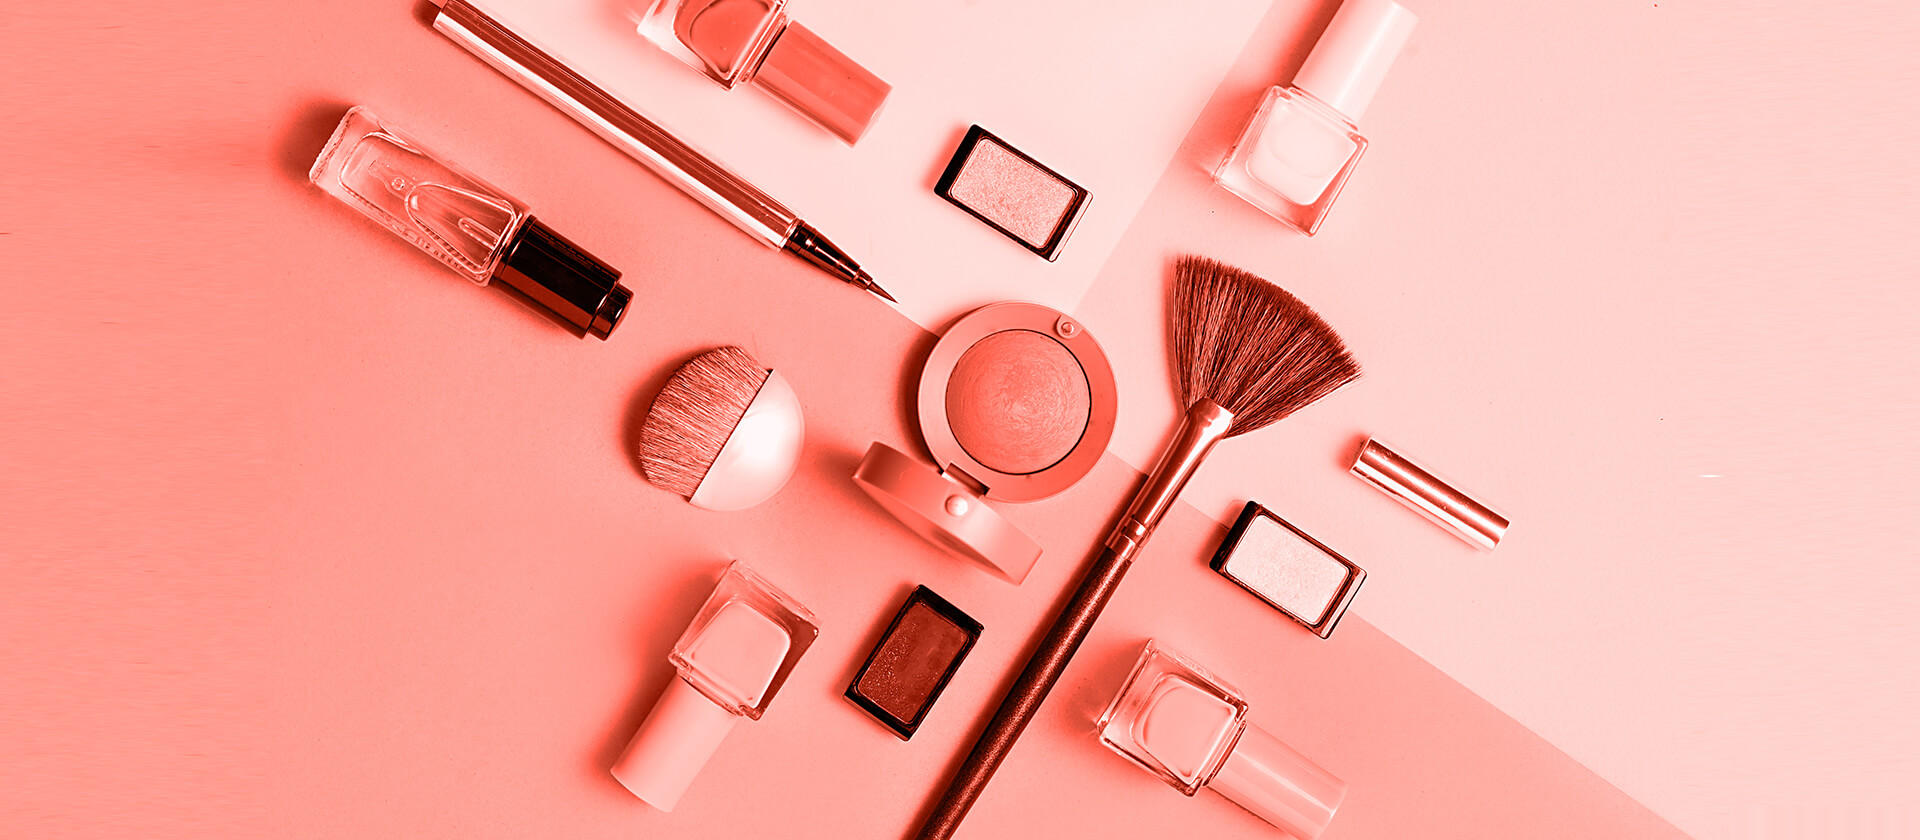 10 luxury makeup brands that are worth investing in.